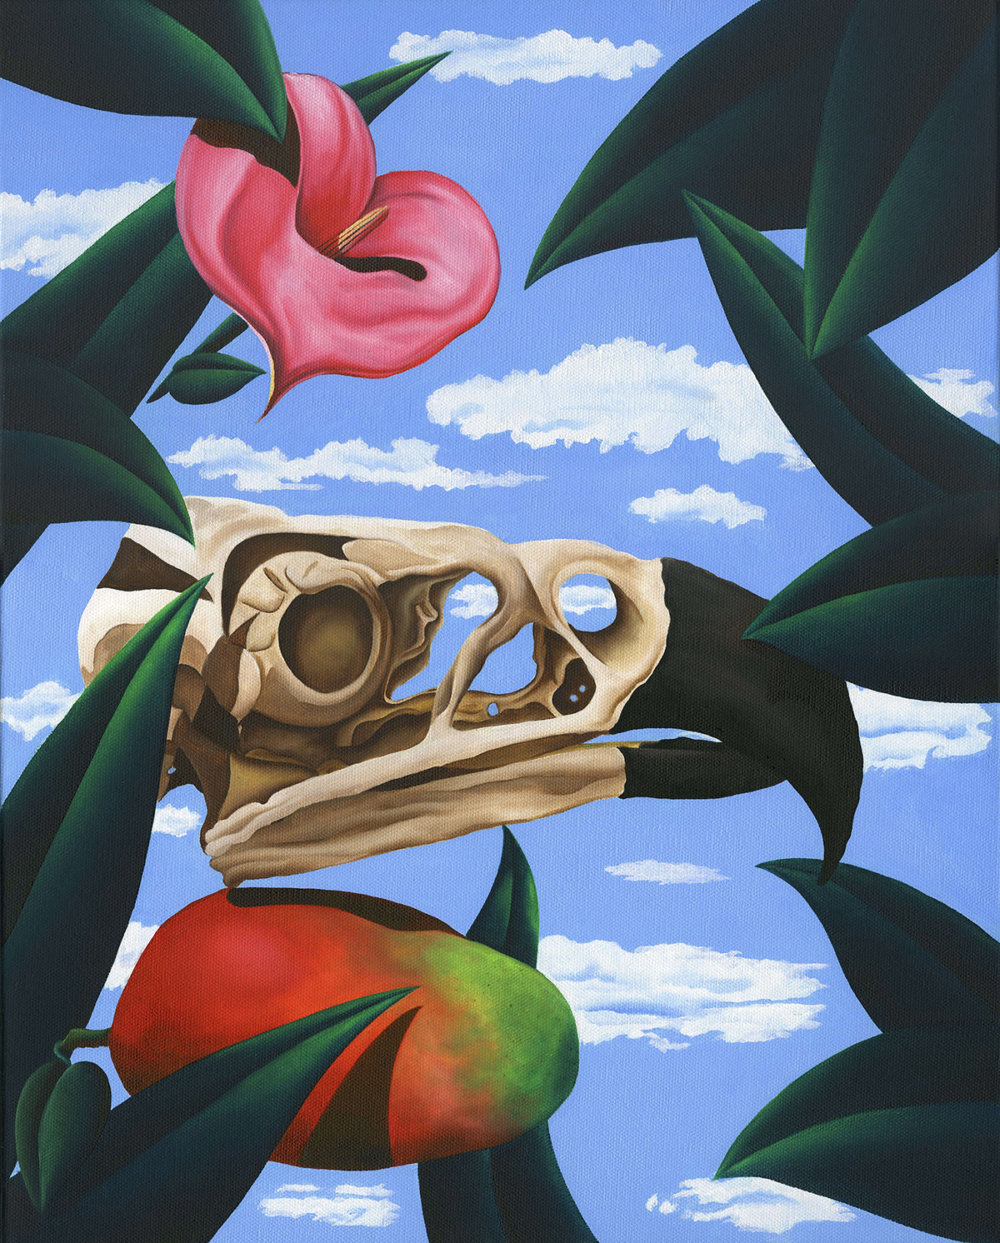 Elegant Chaos Vibrant Surrealist Paintings Of Tropical Fauna And Flora By Anthony Padilla 6